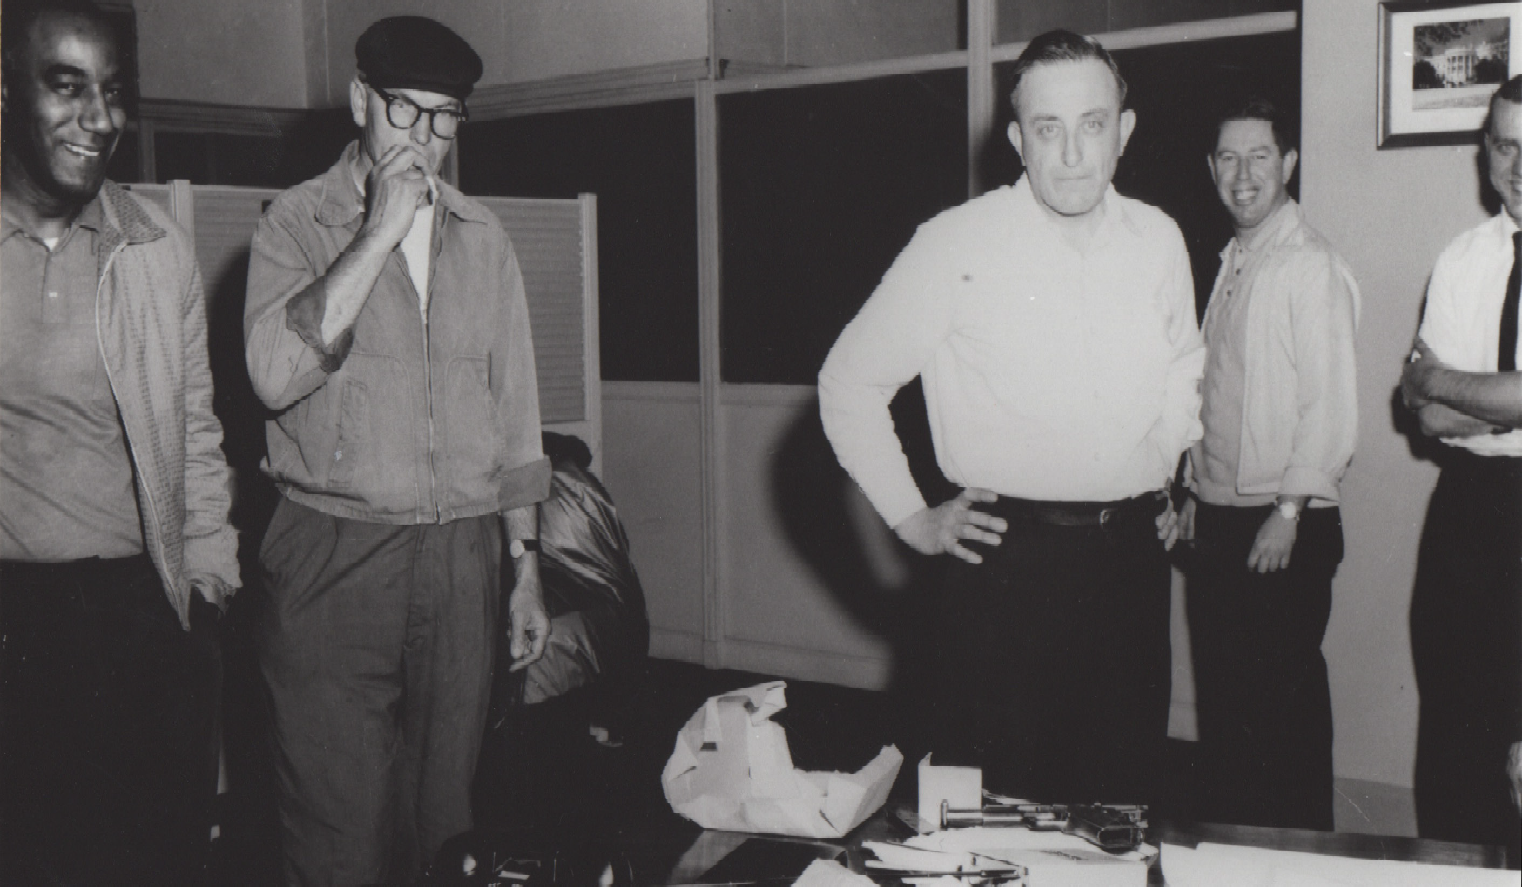 From L to R: Charles Gittens, Casey Szpak, Carmine Motto, Paul Scanlon and Harris Martin are pictured in the New York Field Office following a successful counterfeit investigation, one of their many successful investigations in the1960s.